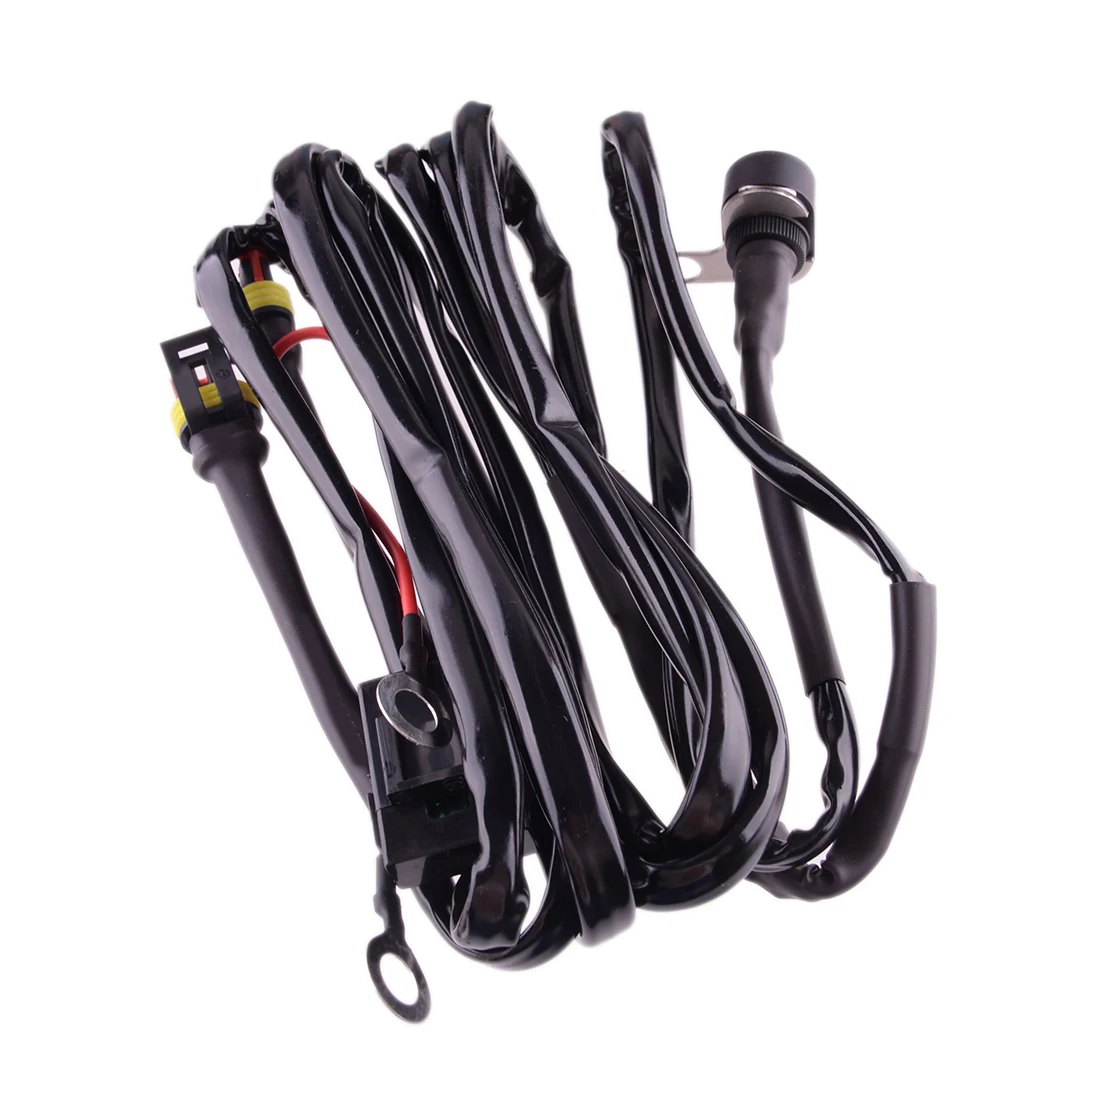 

12V Motorcycle LED Fog Light Headlight Wiring Harness Wire On/Off Switch Fit for BMW R1200GS F800GS/ADV Black